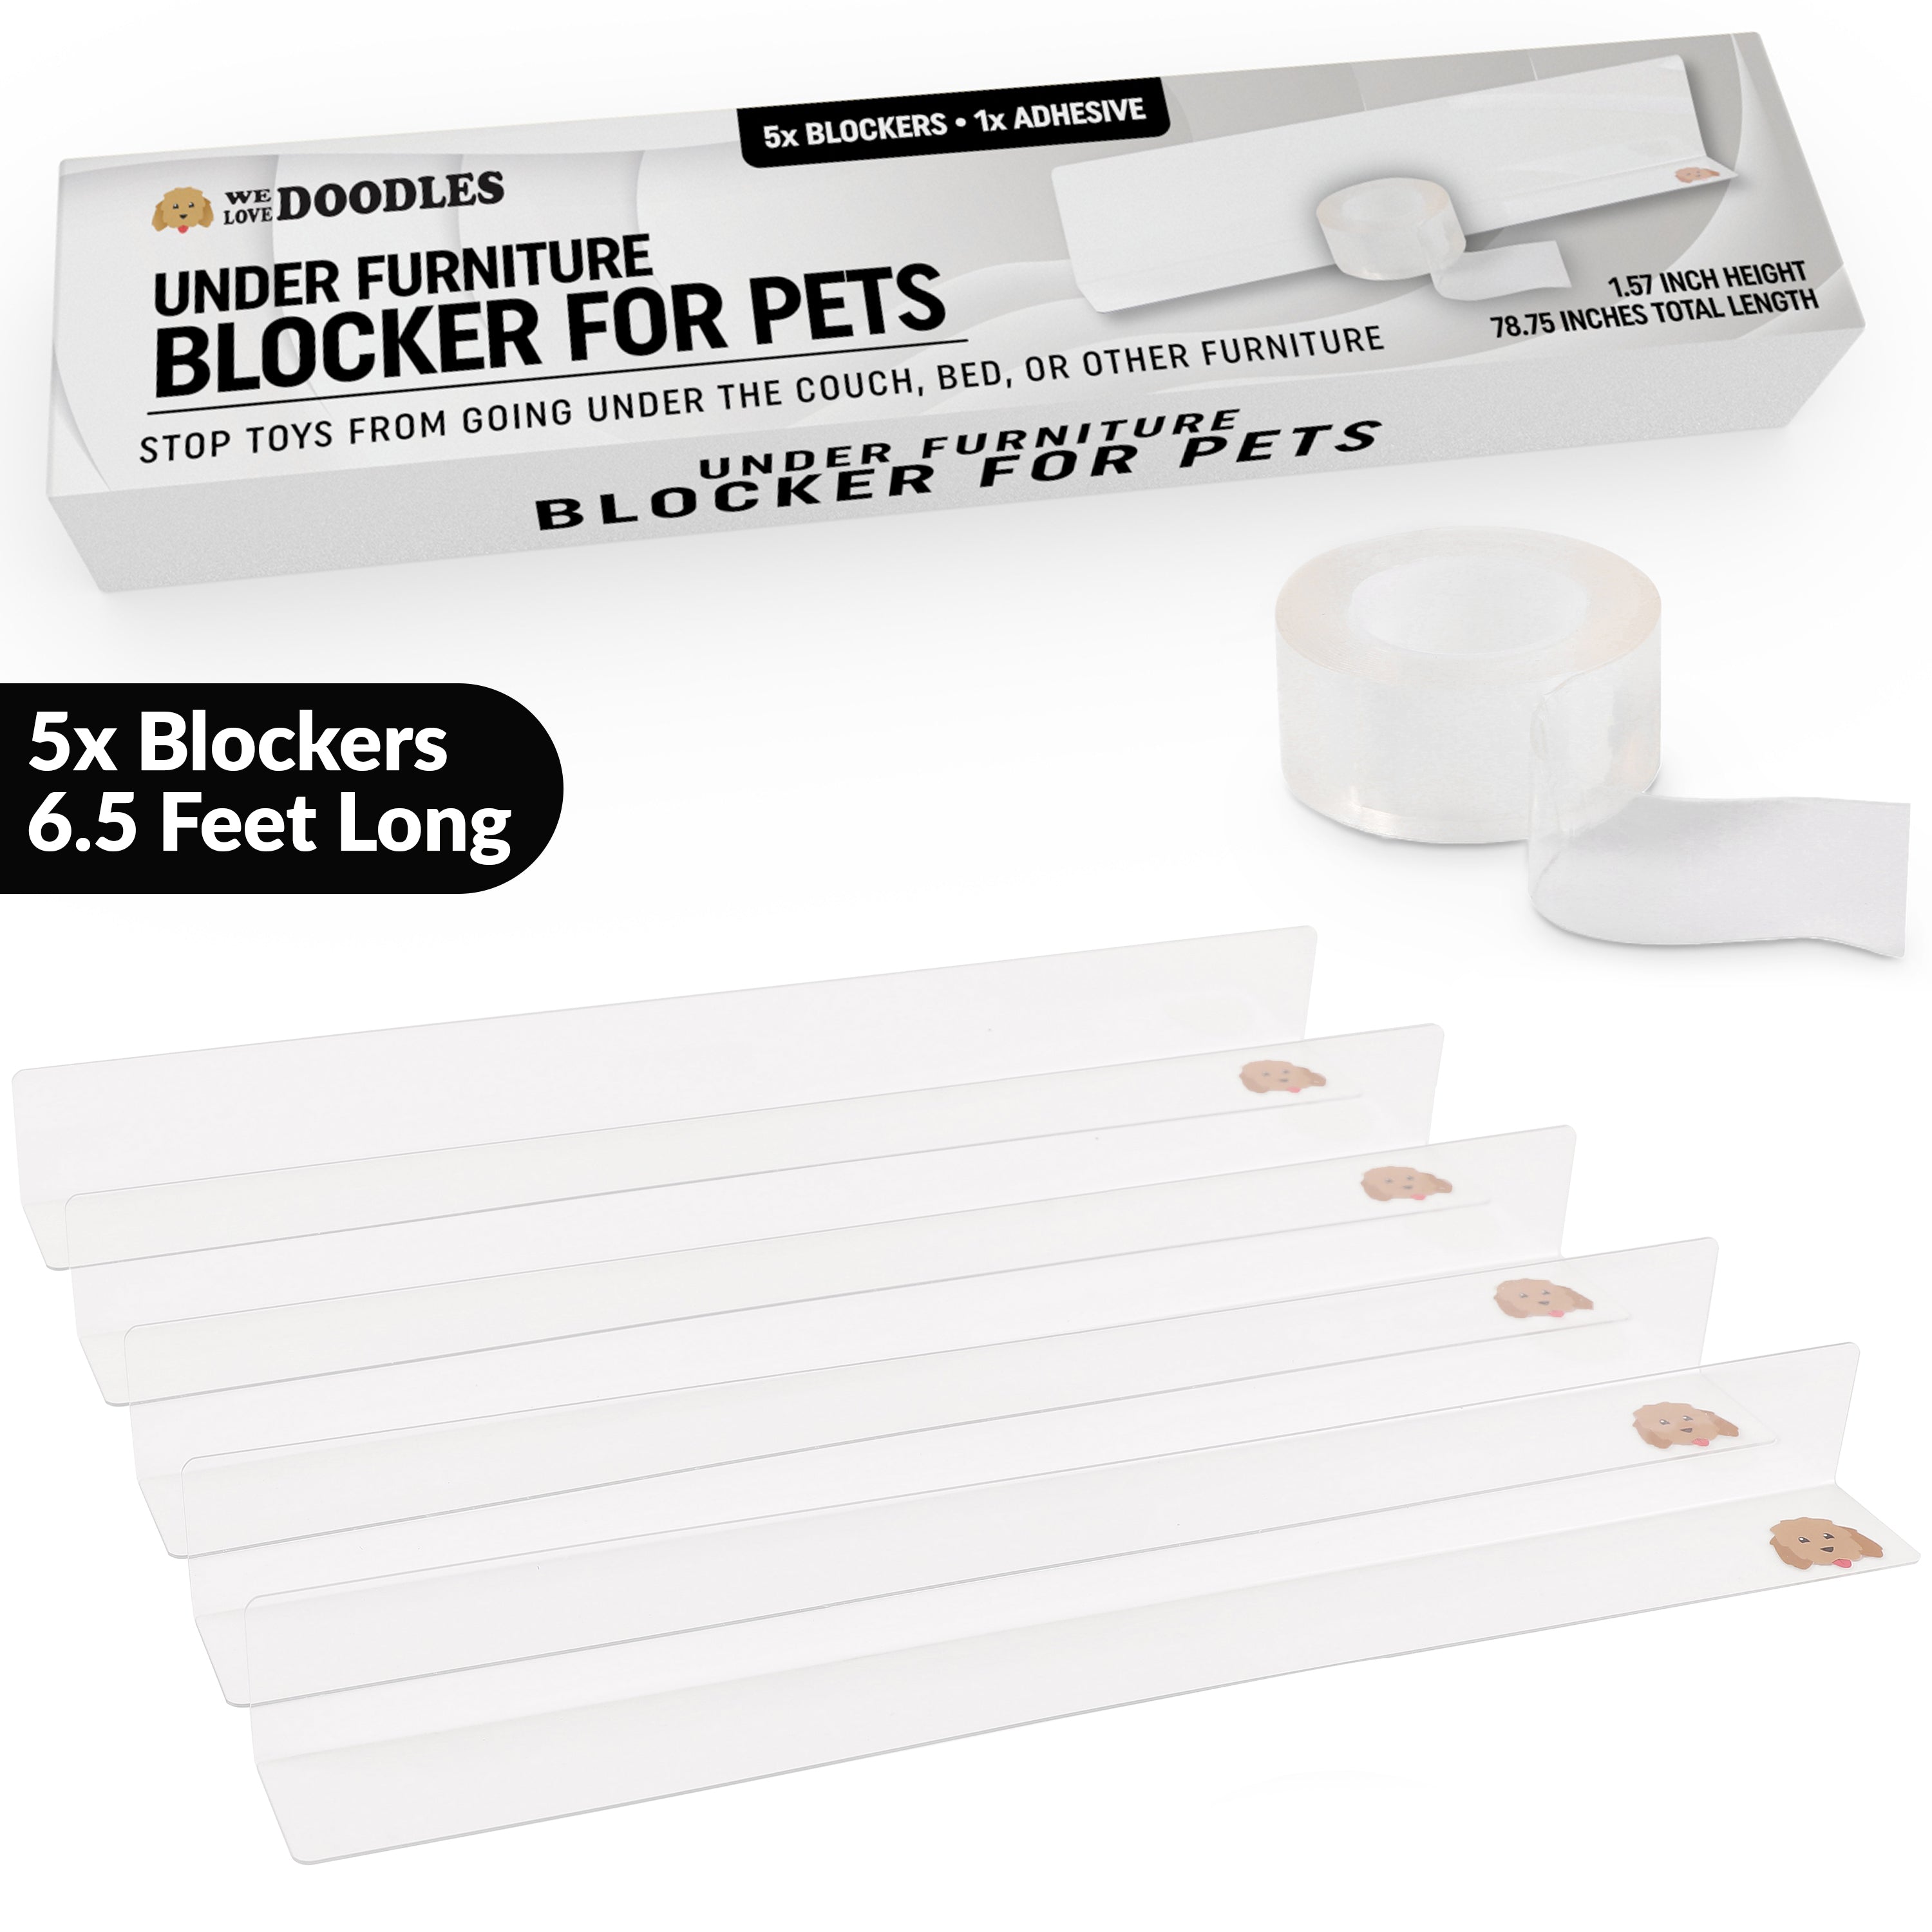 under bed blocker for pets,Easy to Install toy blocker for under